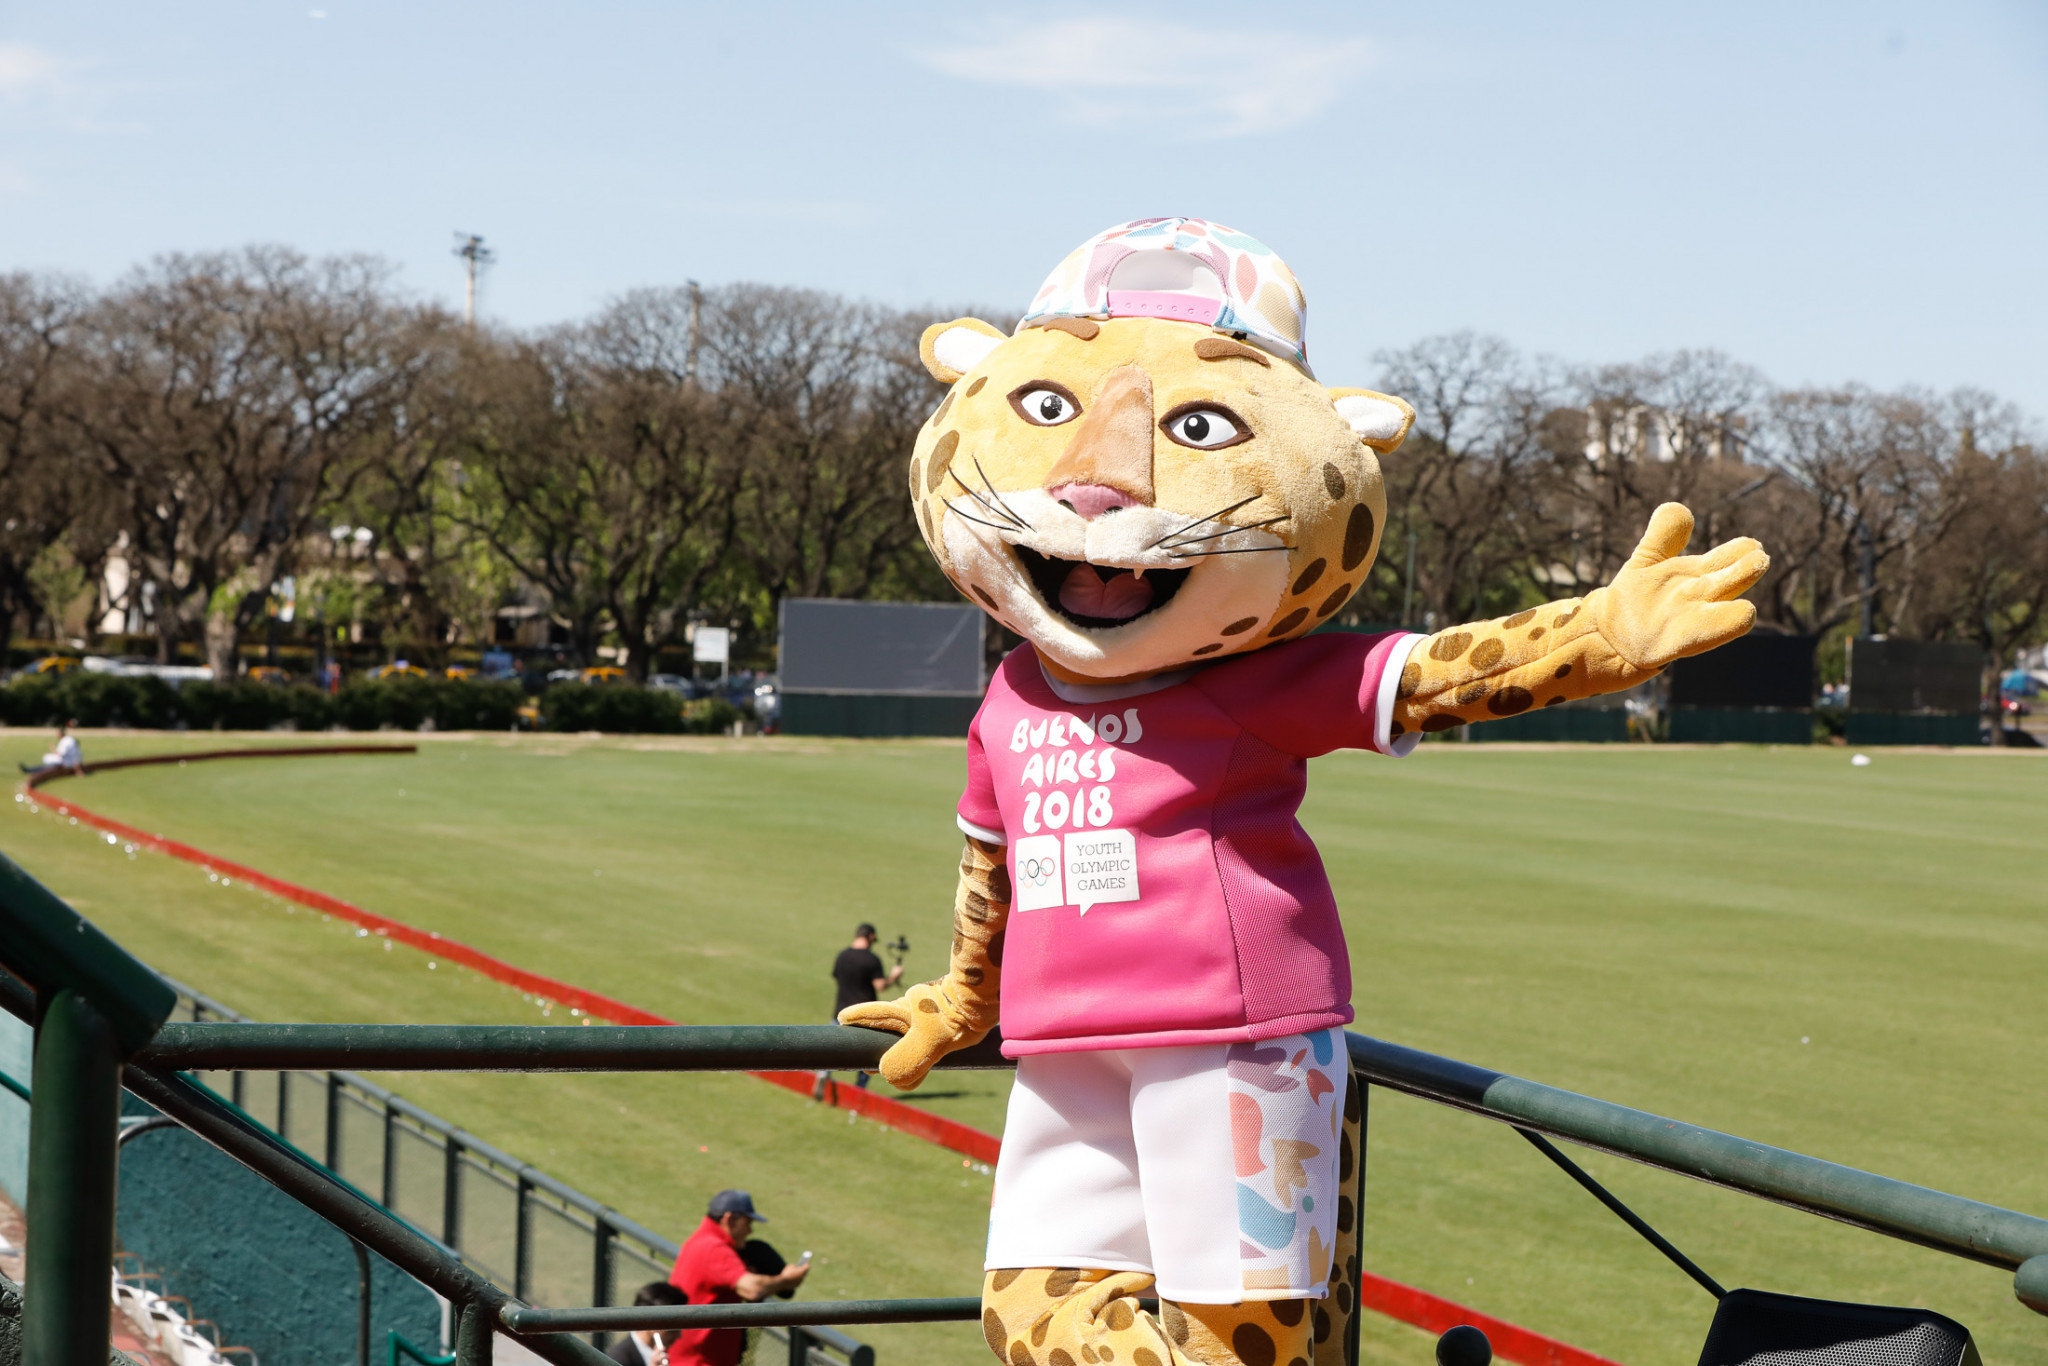 Pandi, the official mascot, has been seen at venues throughout the day ©Buenos Aires 2018